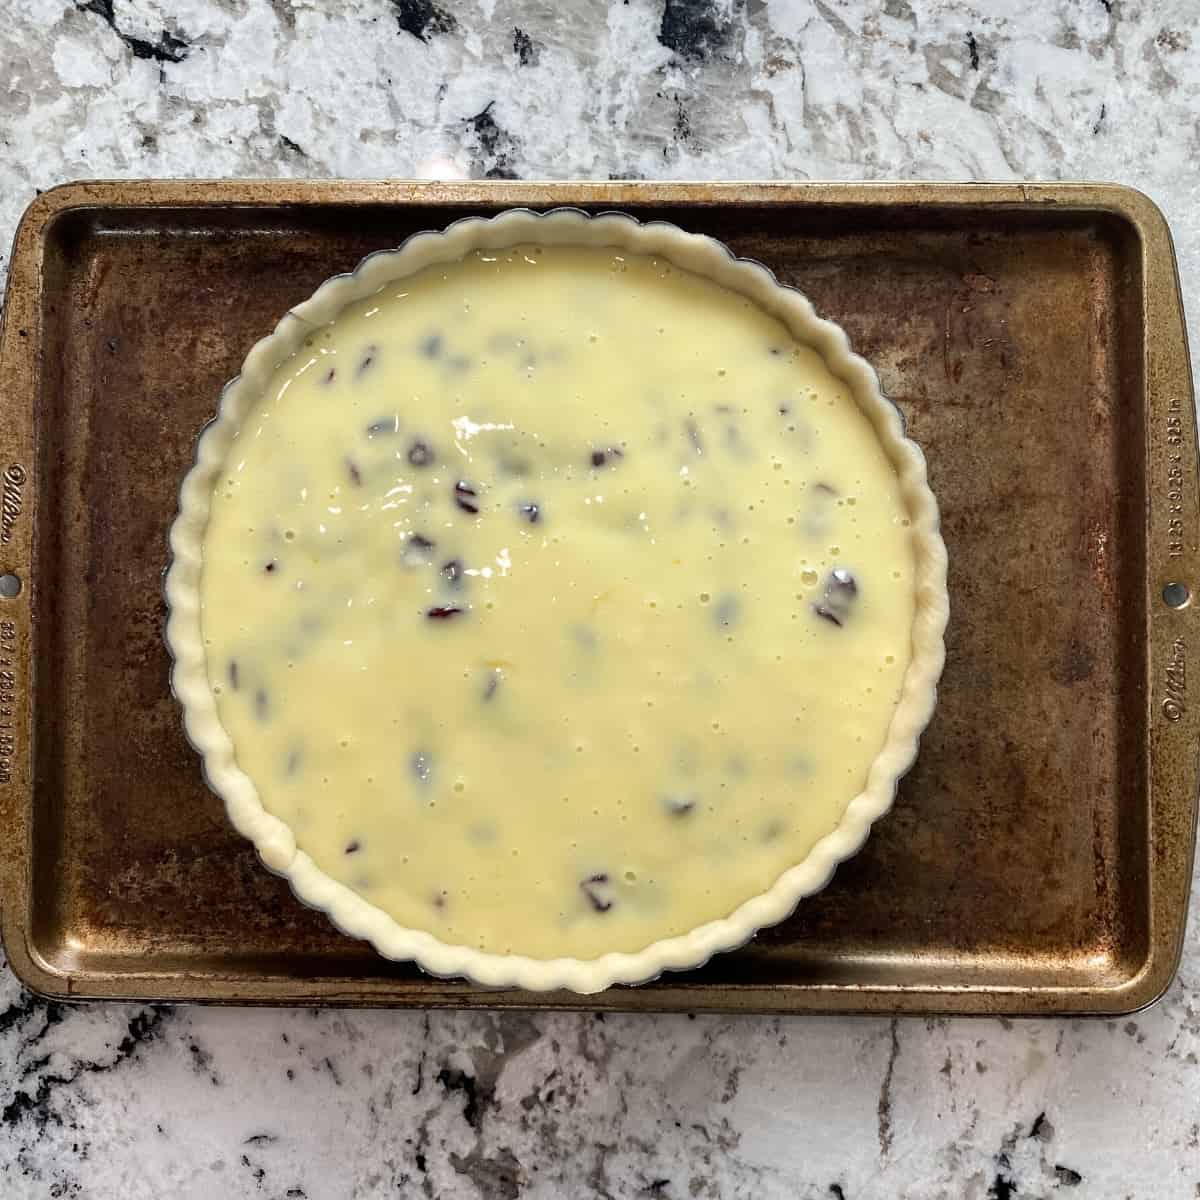 The pie filling has been poured into the prepared tart shell. The tart pan is on a well used baking sheet.